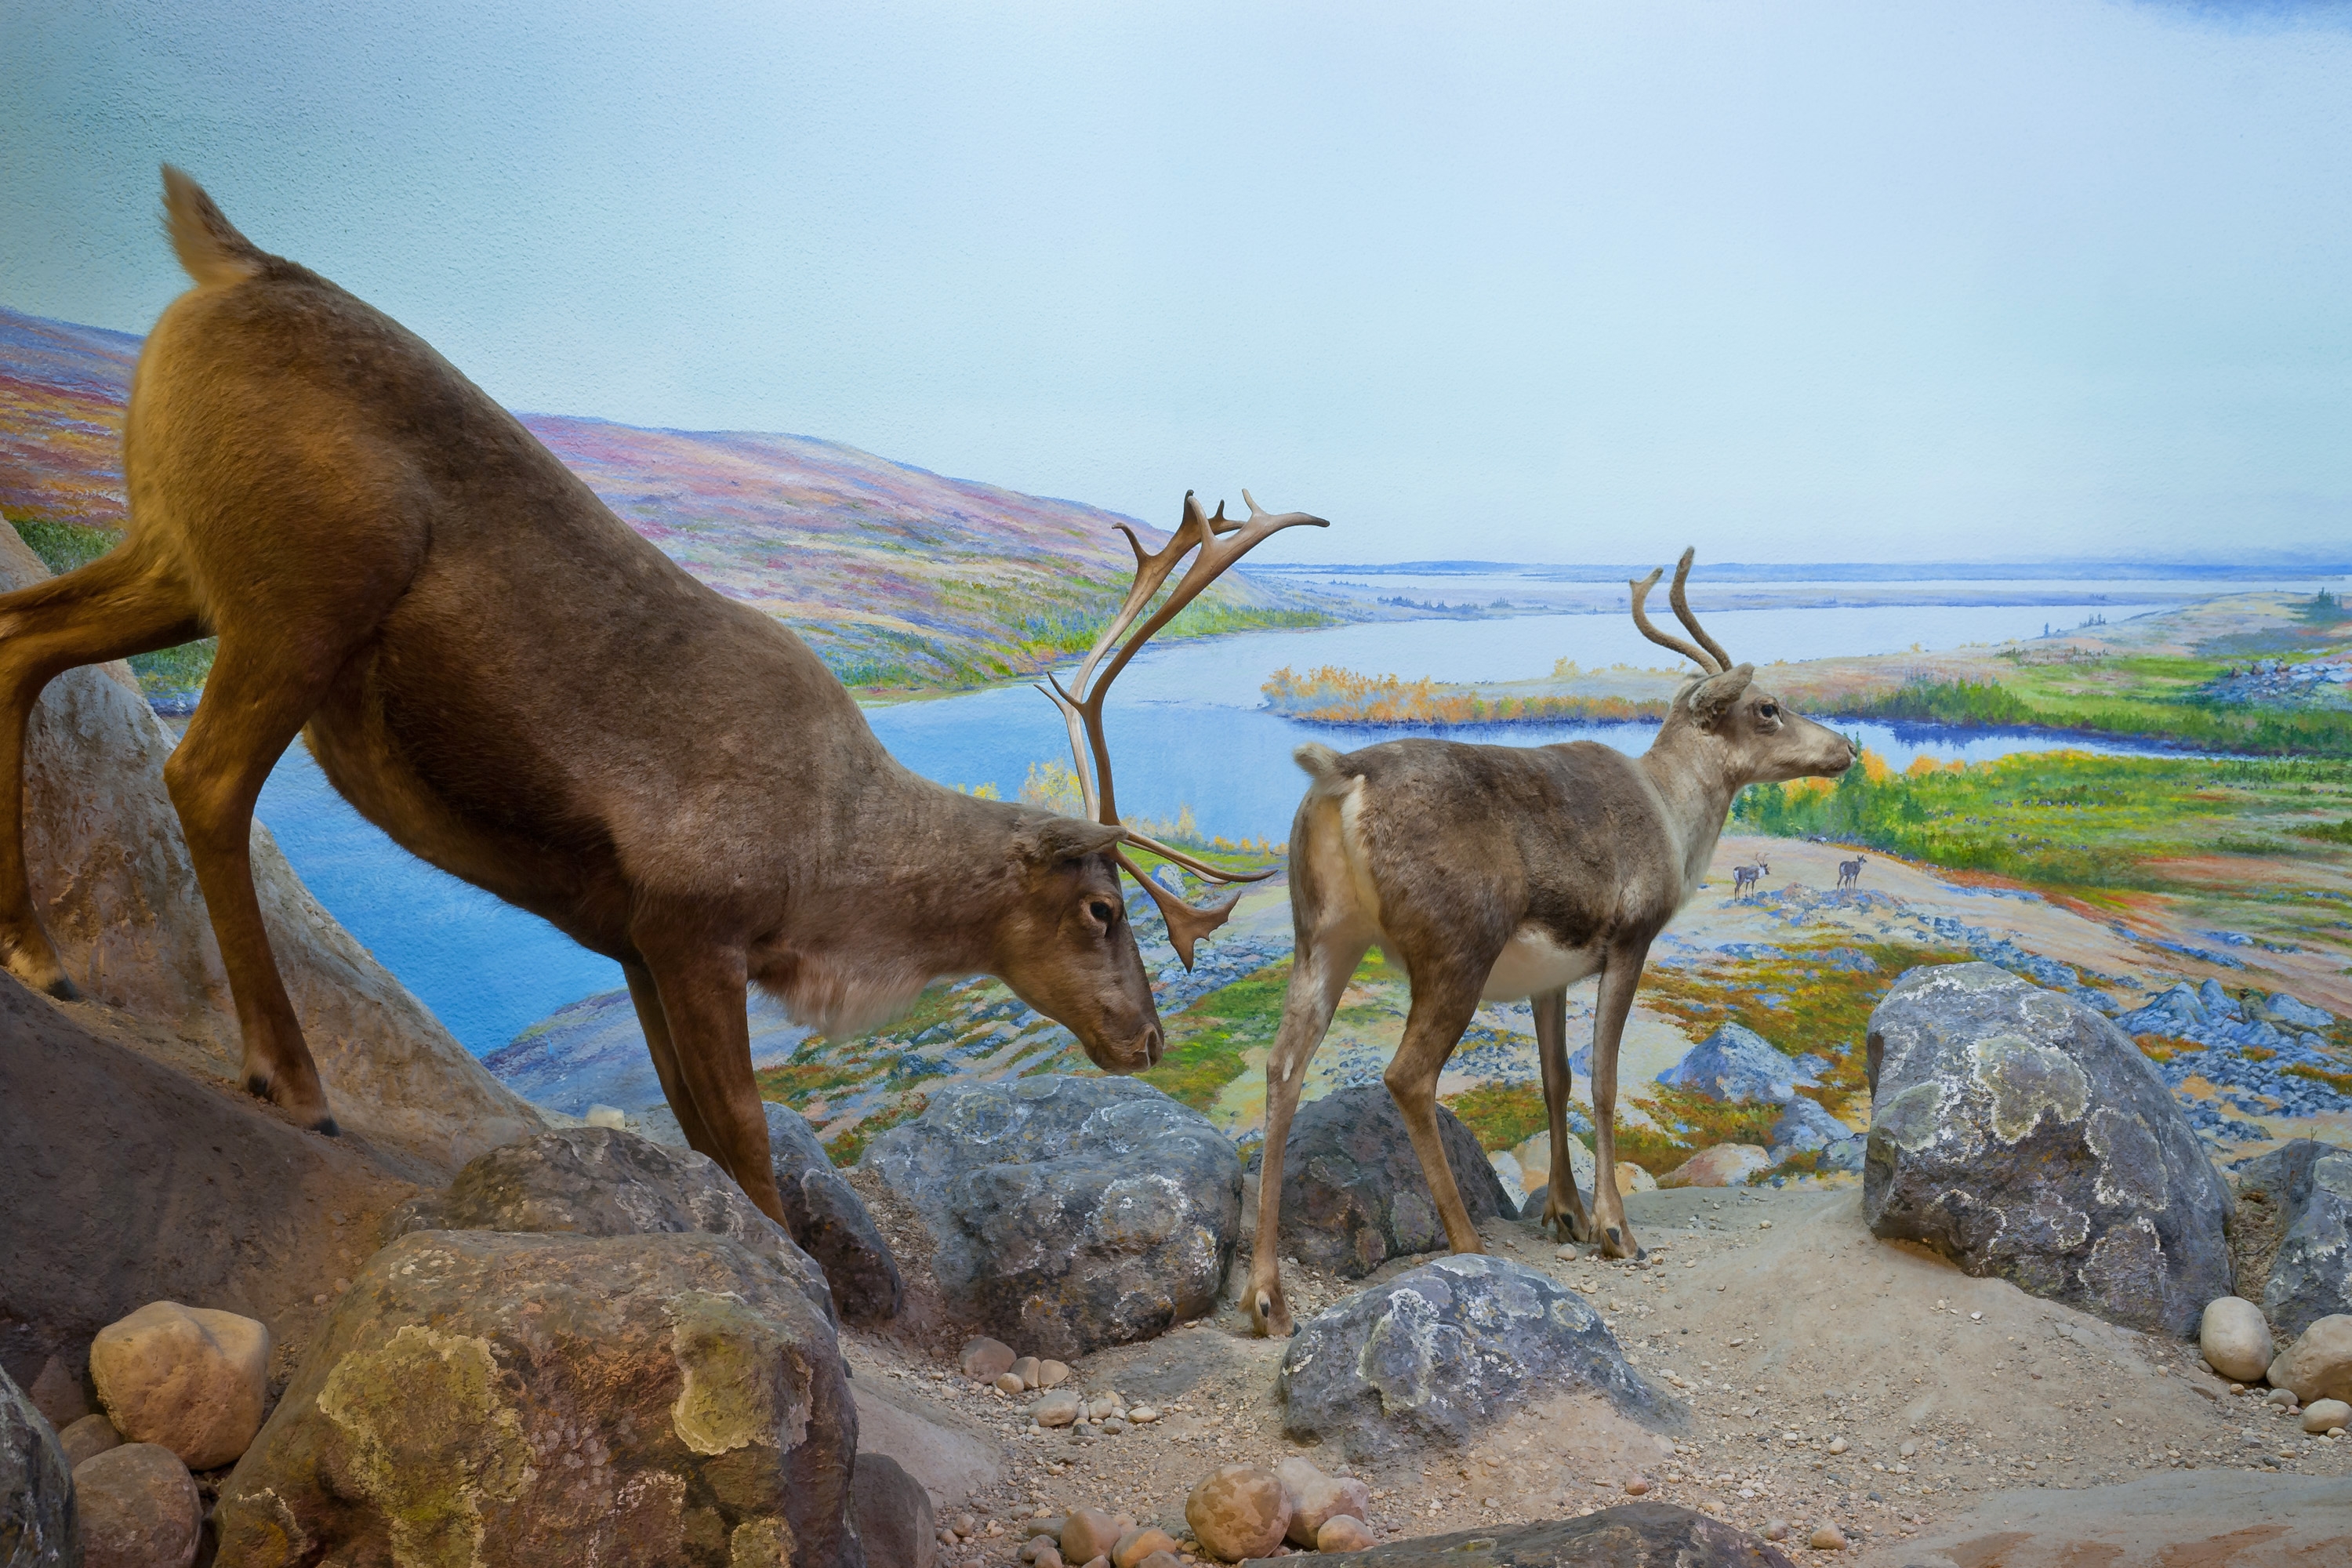 Diorama of two caribou walking on lichen-covered rocks and gravel on an esker in front of a painted subarctic landscape with a lake and lichen-heath plant communities in the background.